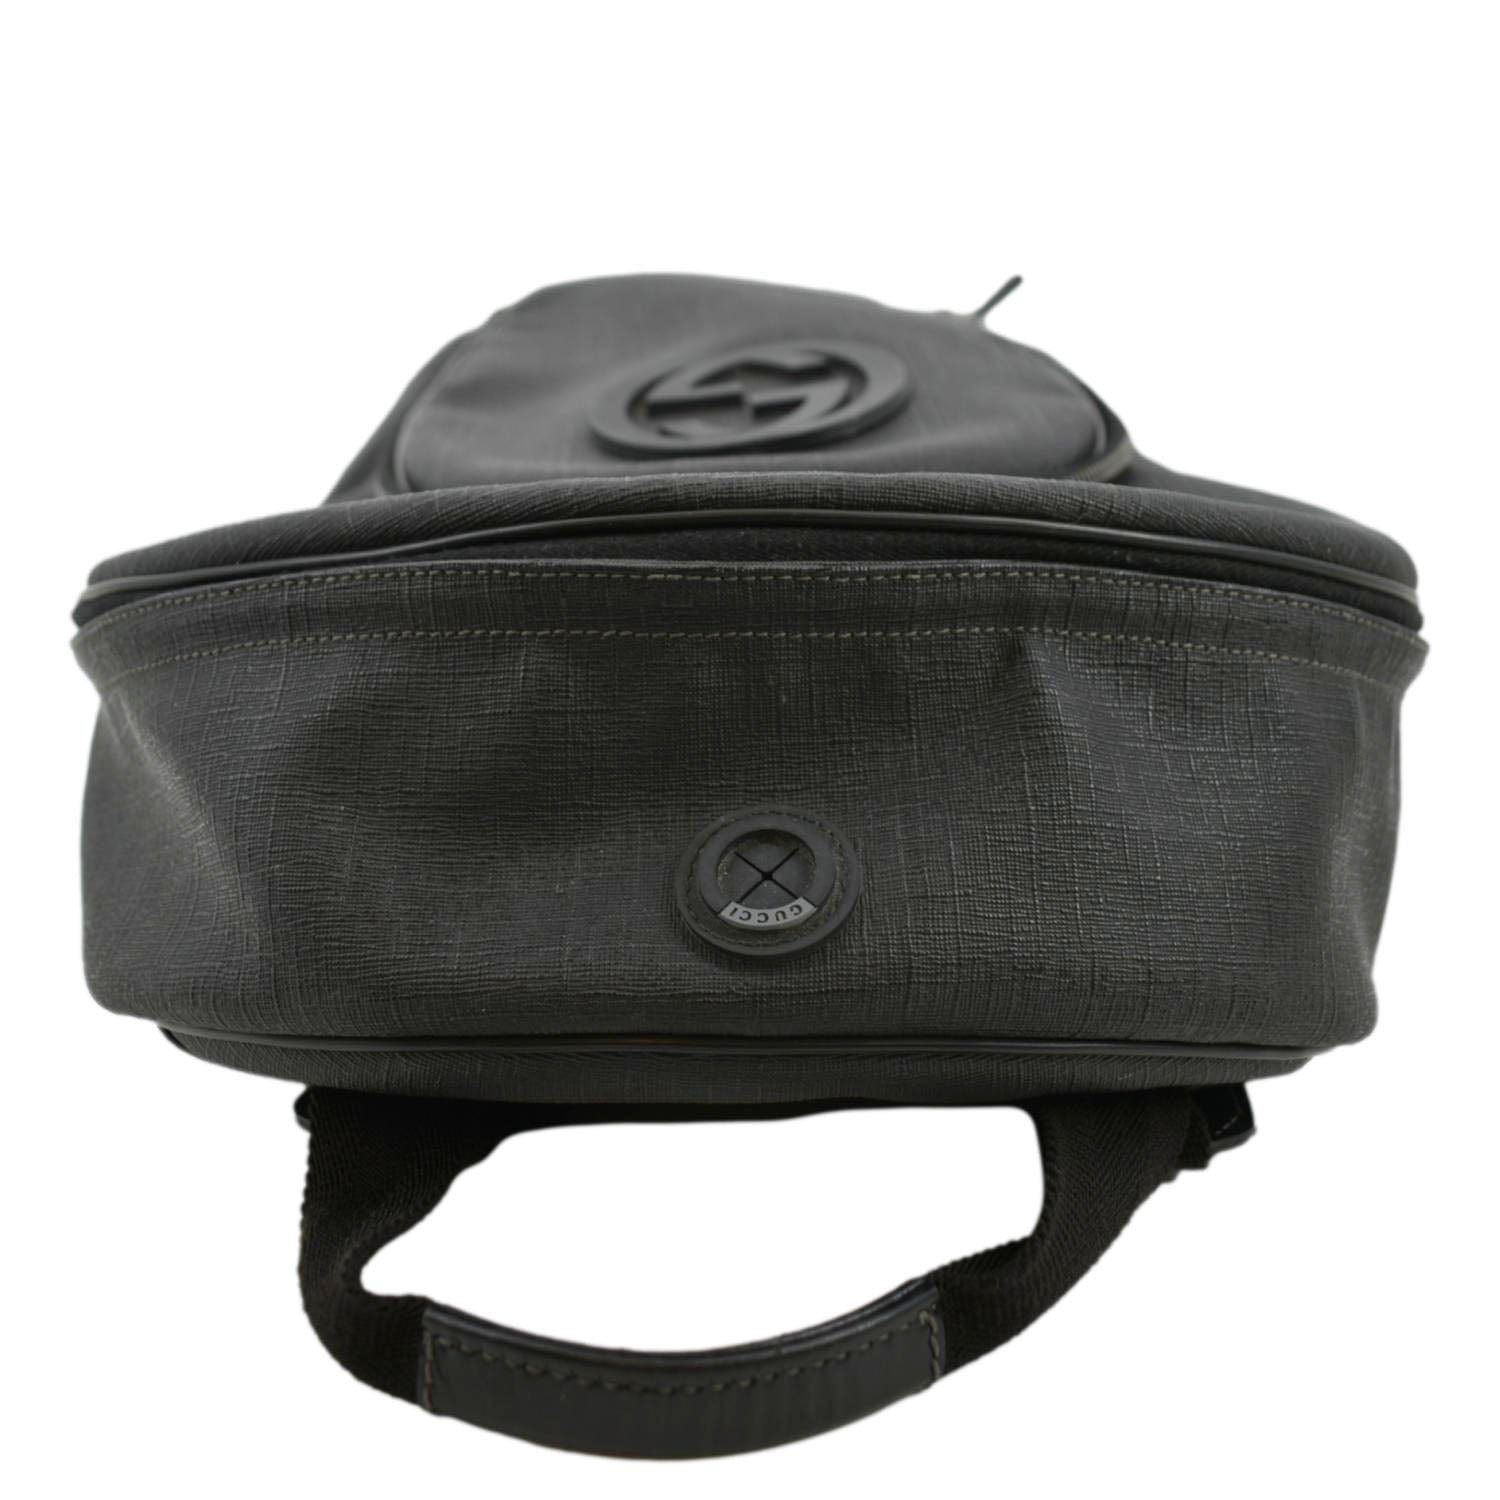 Sling backpack with Interlocking G